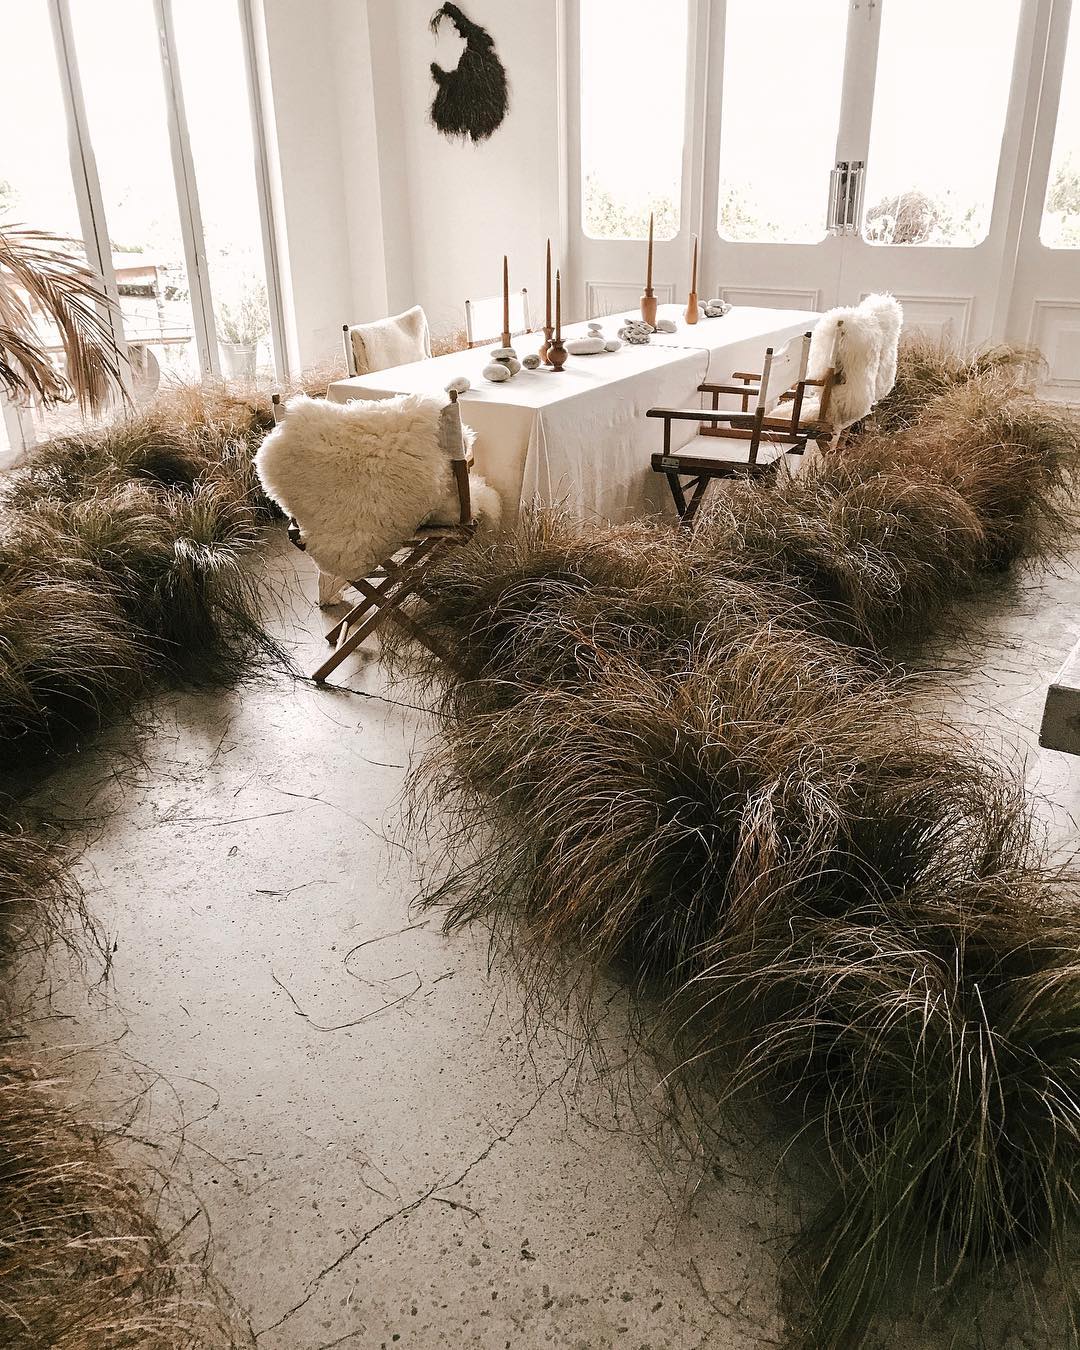 an aisle made from grasses leads to a simple table | thanksgiving table setting ideas on coco kelley